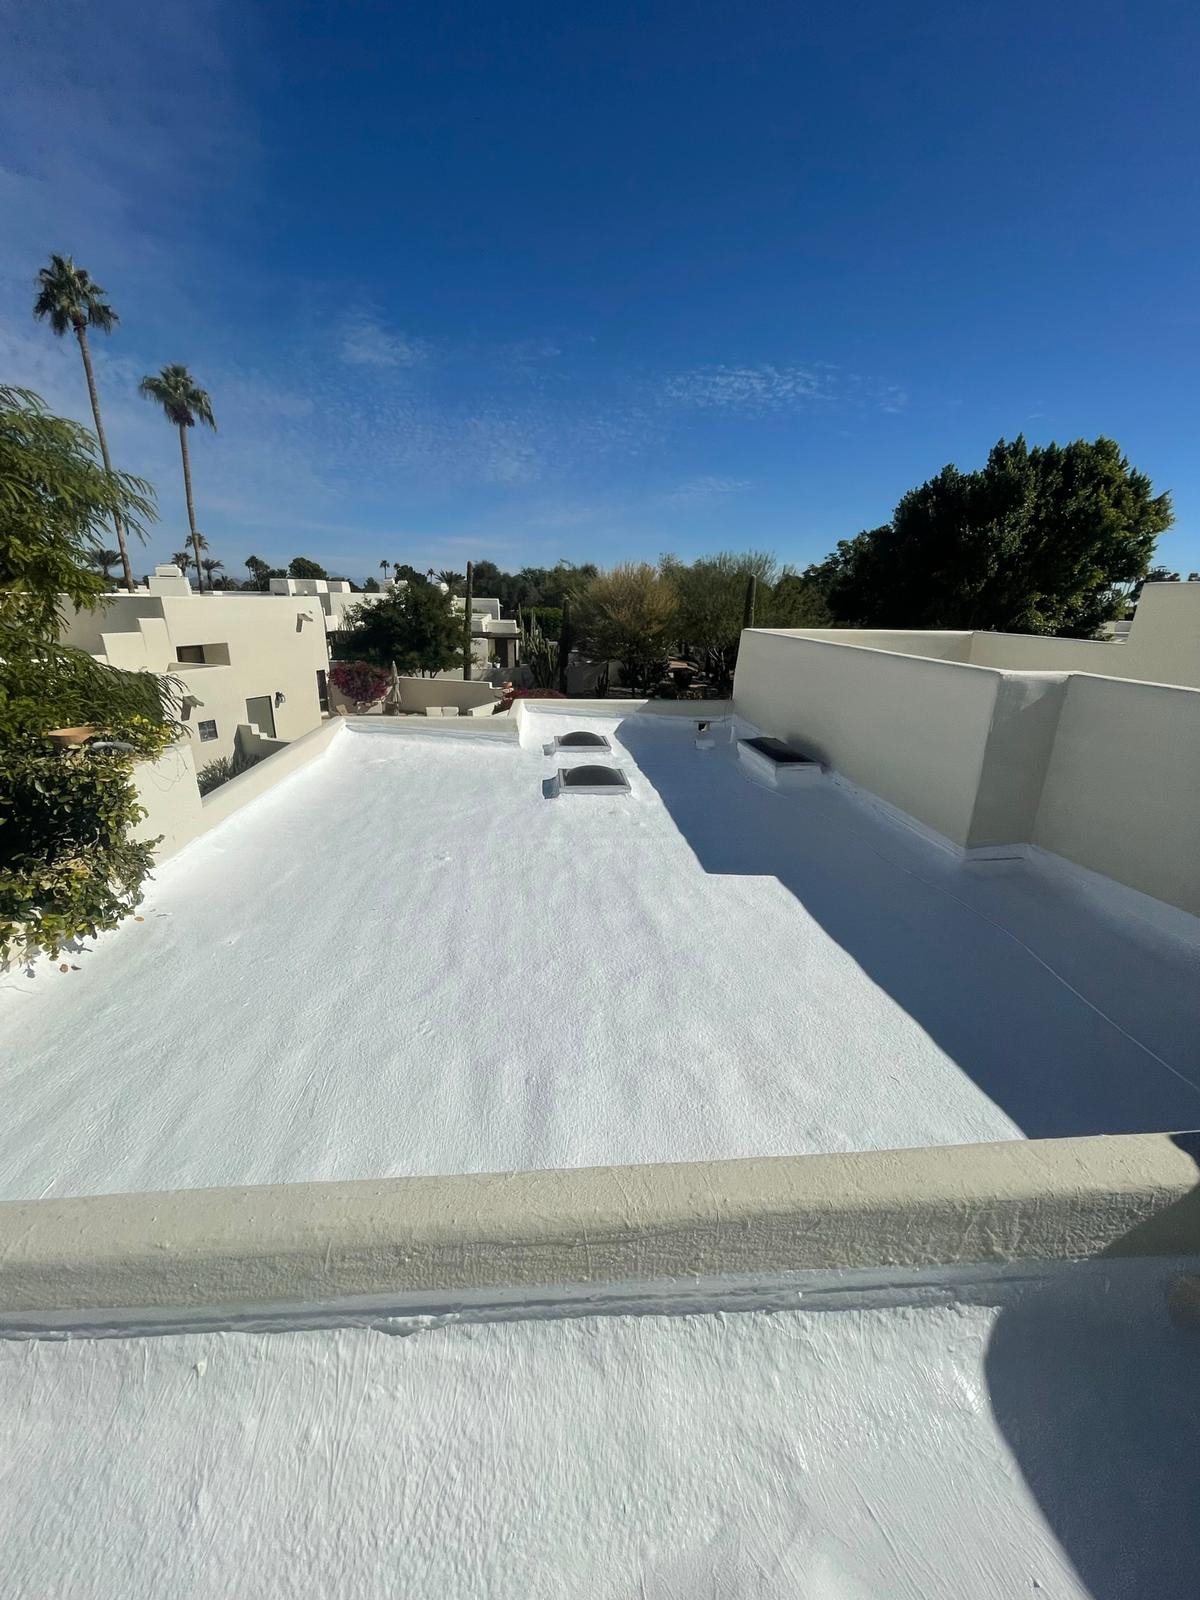 Close-up of the thick foam coating on a rooftop in Peoria, signifying high insulation quality.